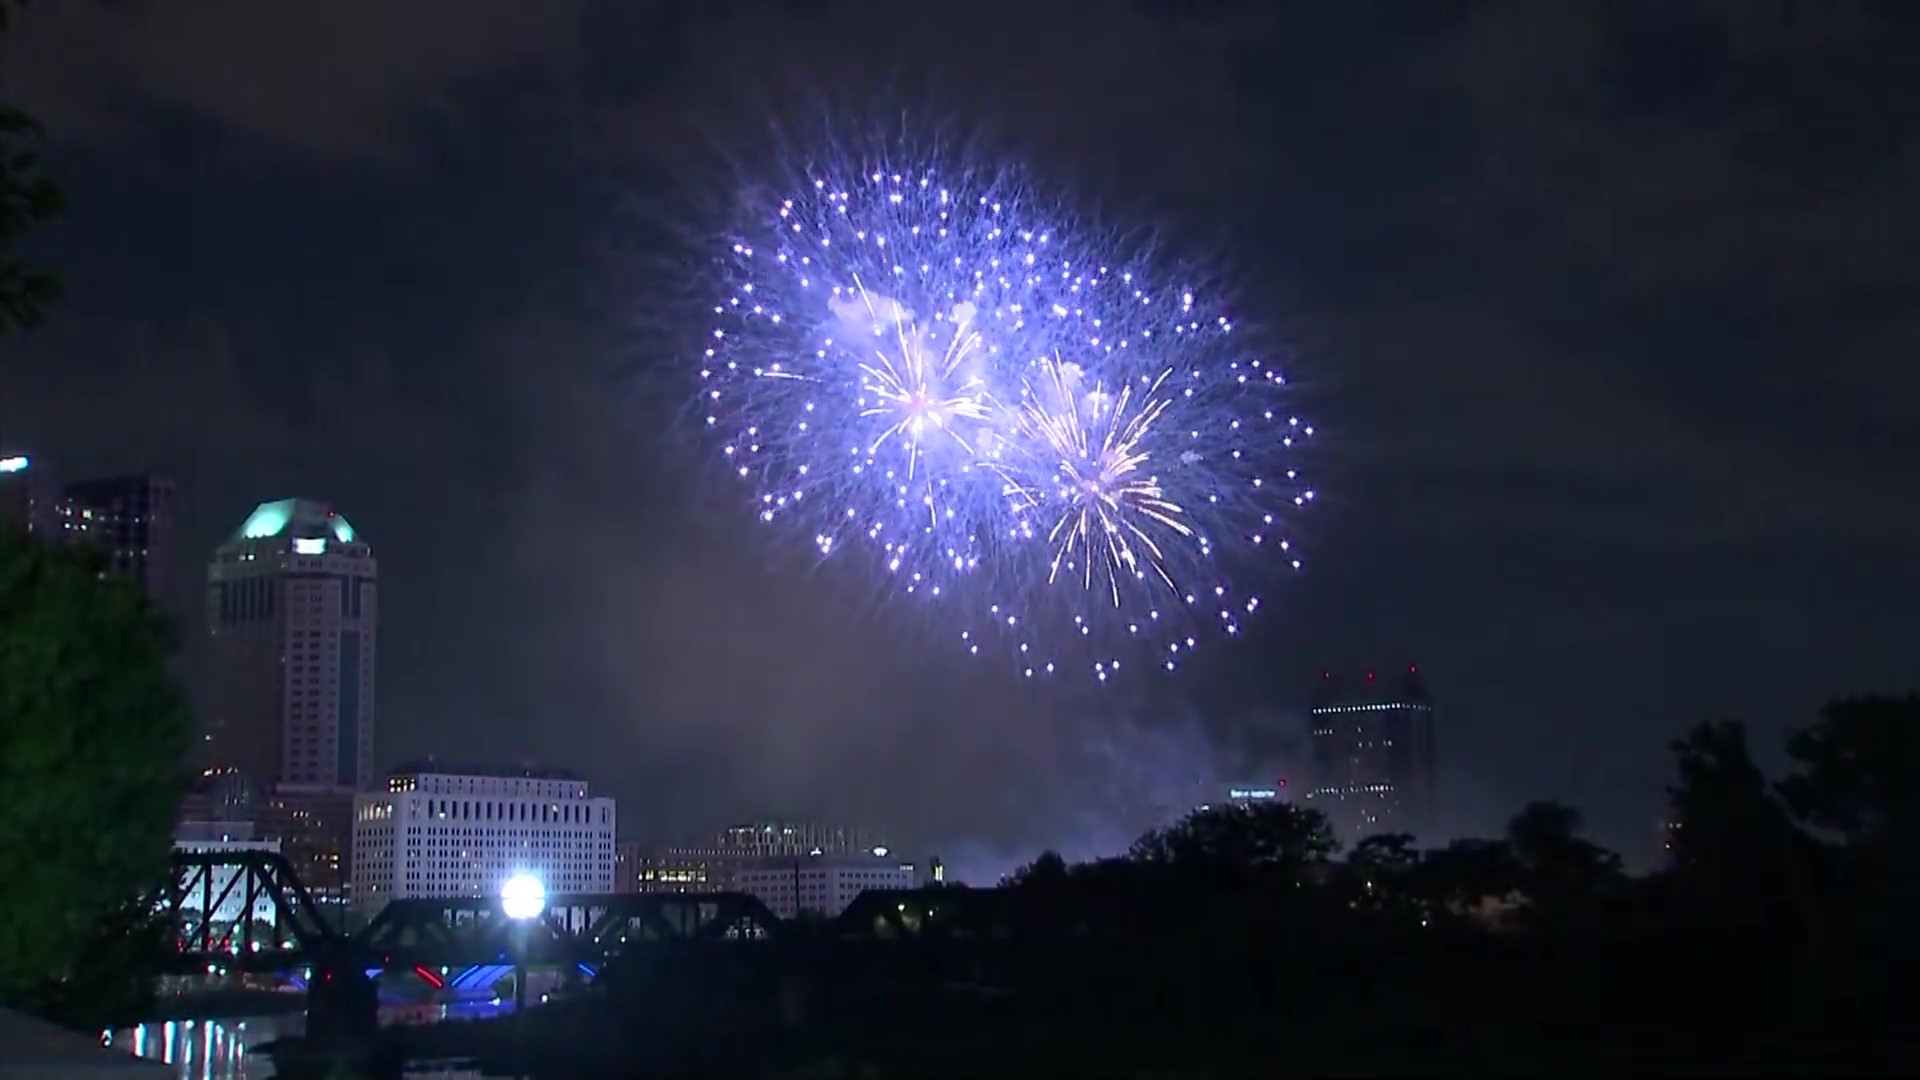 Rain or shine, people are excited about celebrating Independence Day in Columbus.